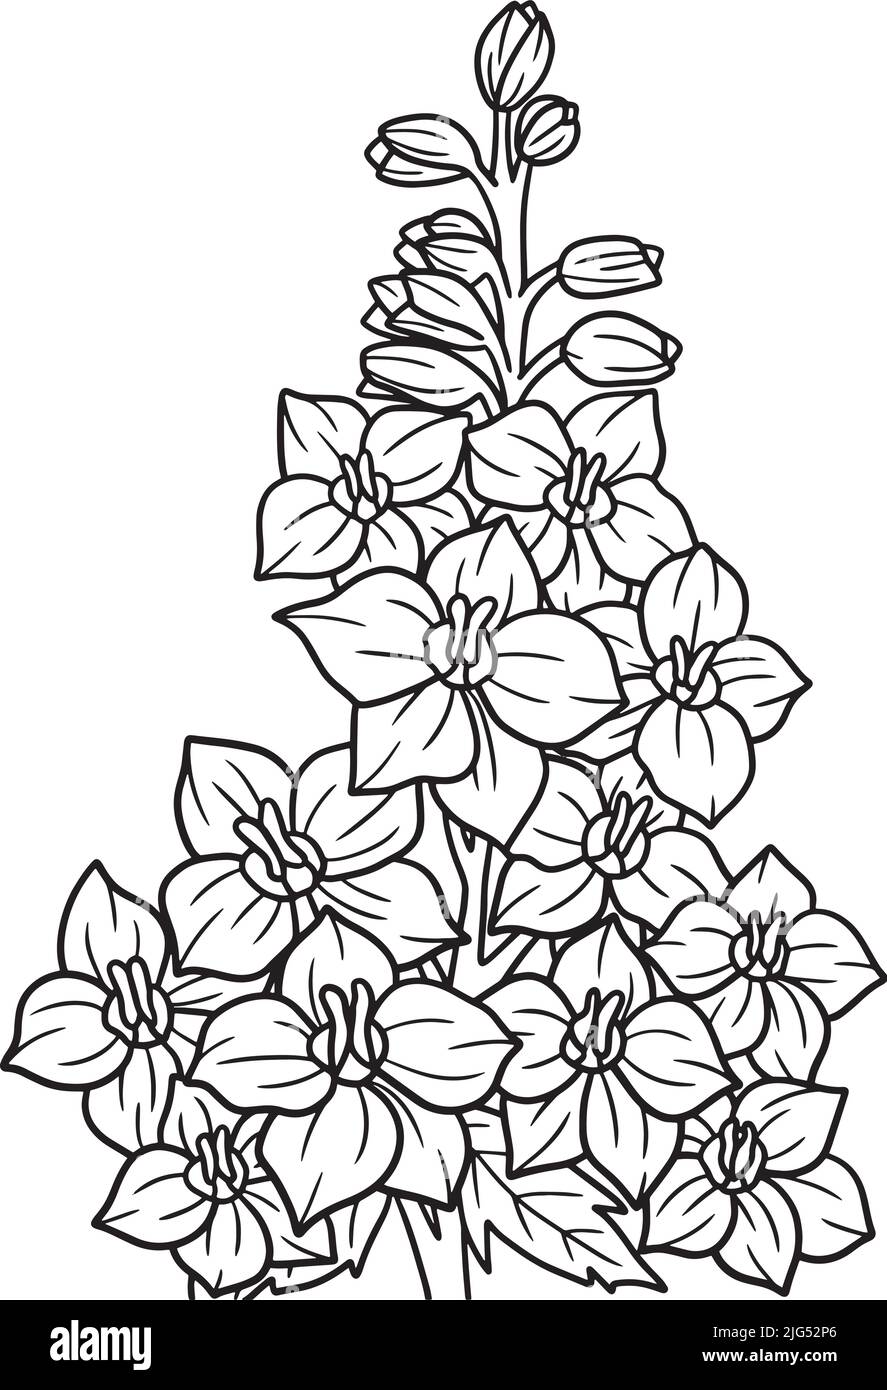 Delphinium Flower Coloring Page for Adults Stock Vector